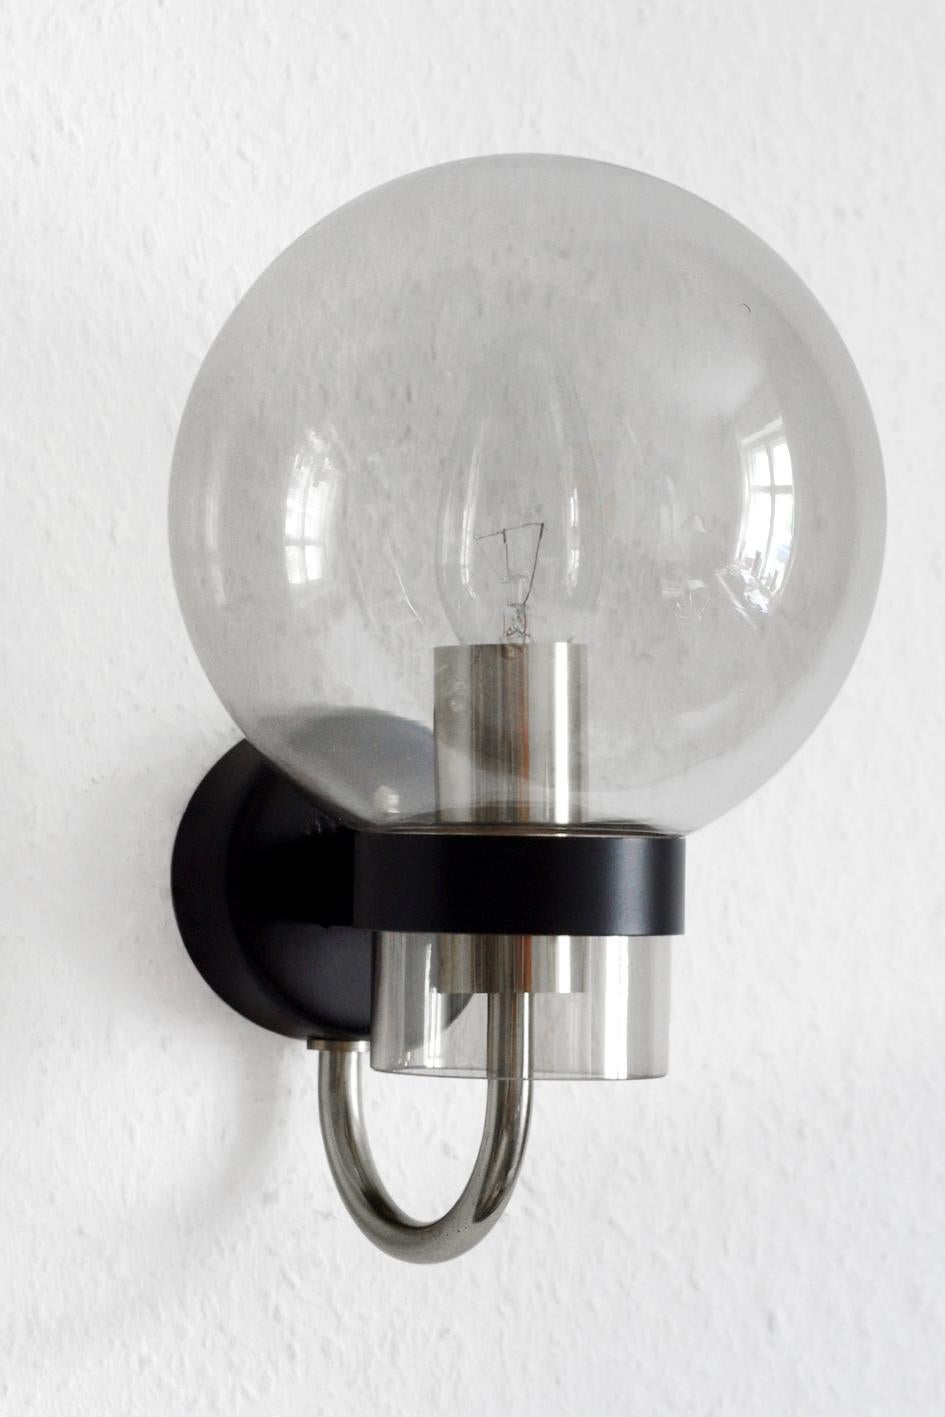 Pair of Rare Modernist Glass Globes Sconces Wall Lamps by Limburg, Germany (Minimalistisch)